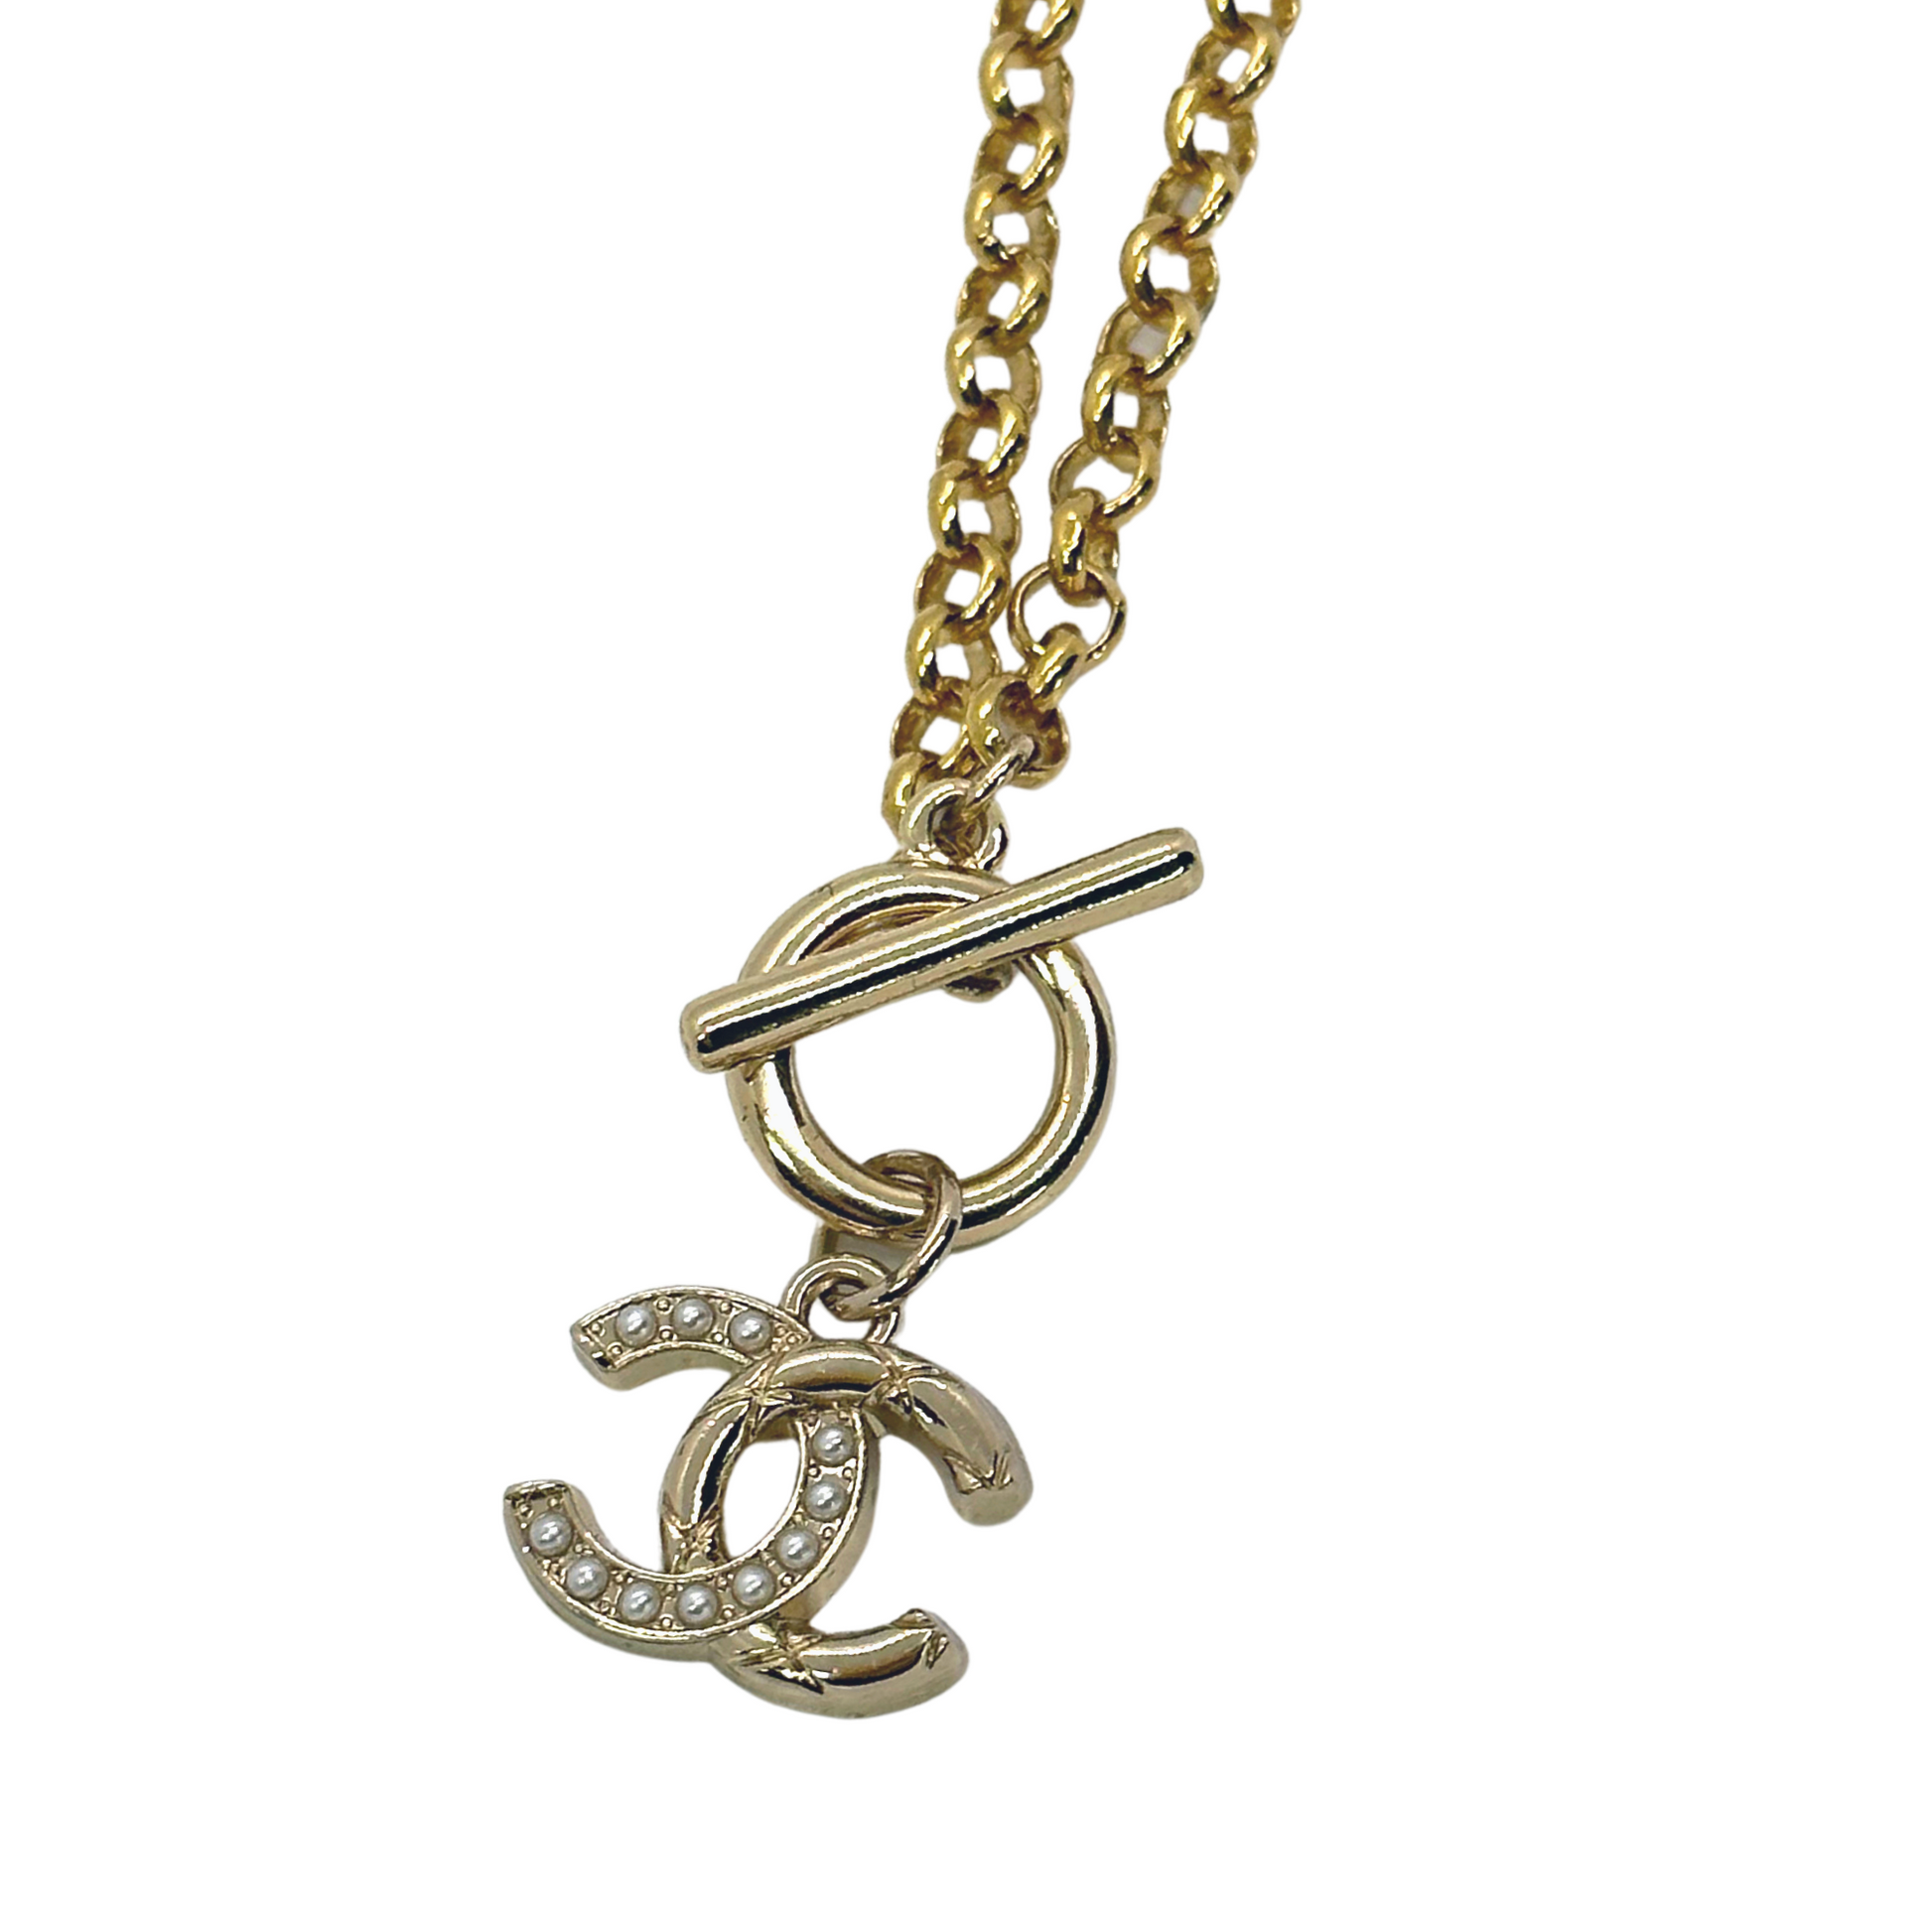 Authentic Chanel Half Faux Pearl Pendant | Reworked Gold 16" Necklace